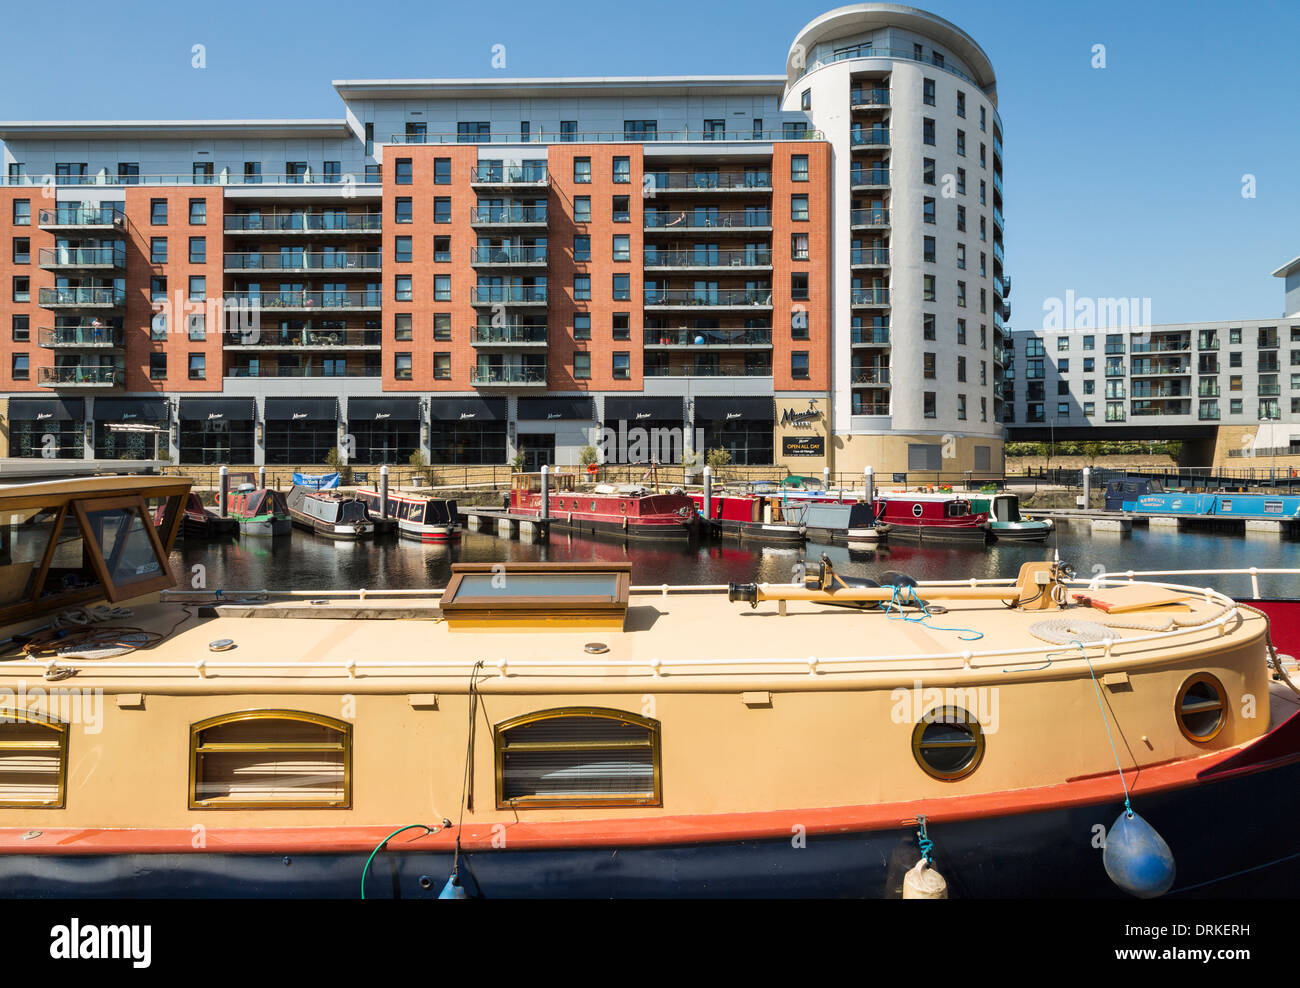 Boats and apartment buildings at Clarence Dock, Leeds, England Stock Photo